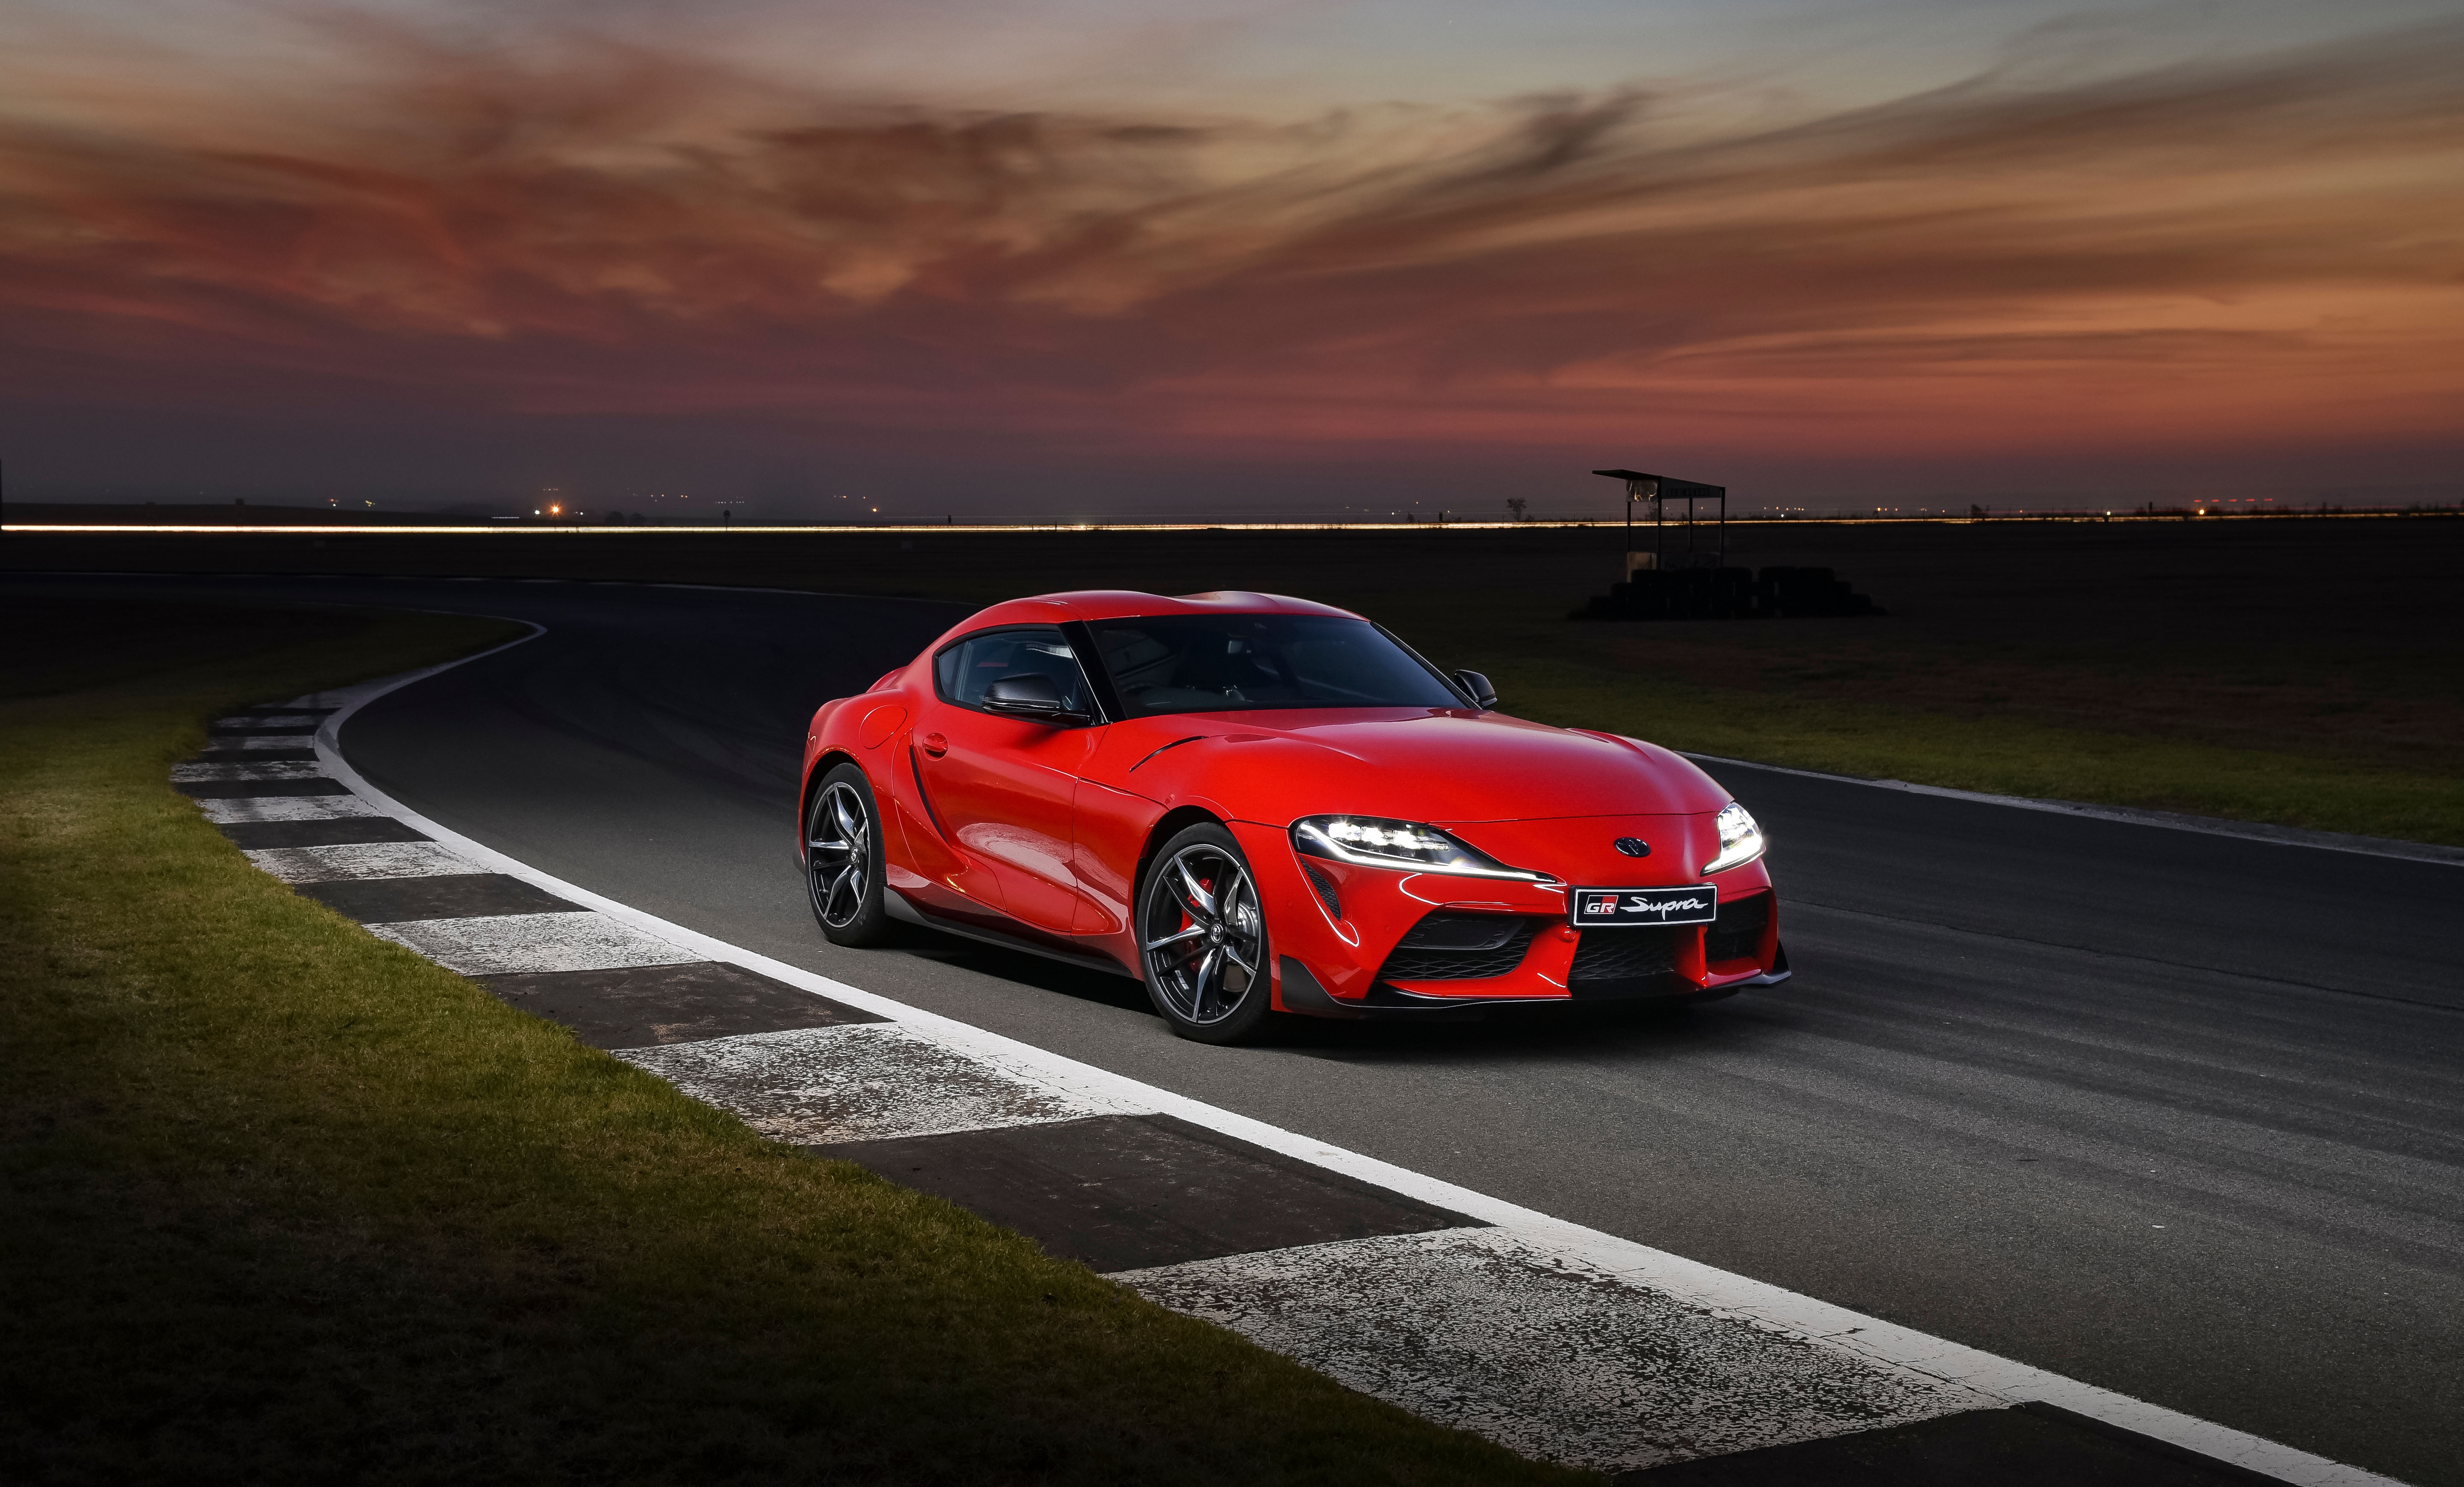 Wallpapers road red sports cars on the desktop